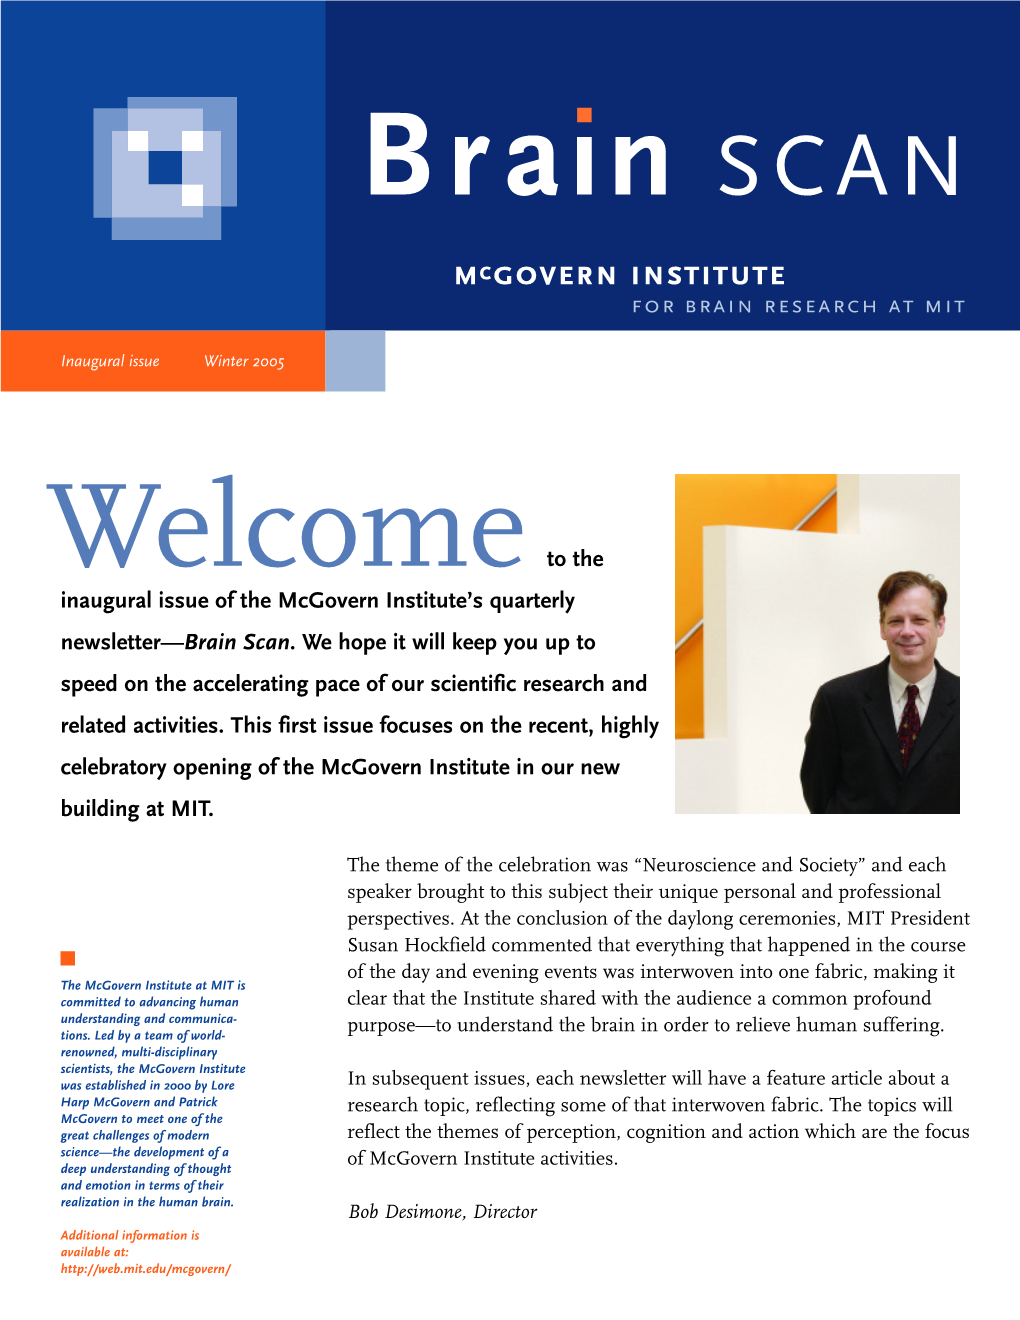 Issue 1: Opening Day at the Mcgovern Institute's New Home